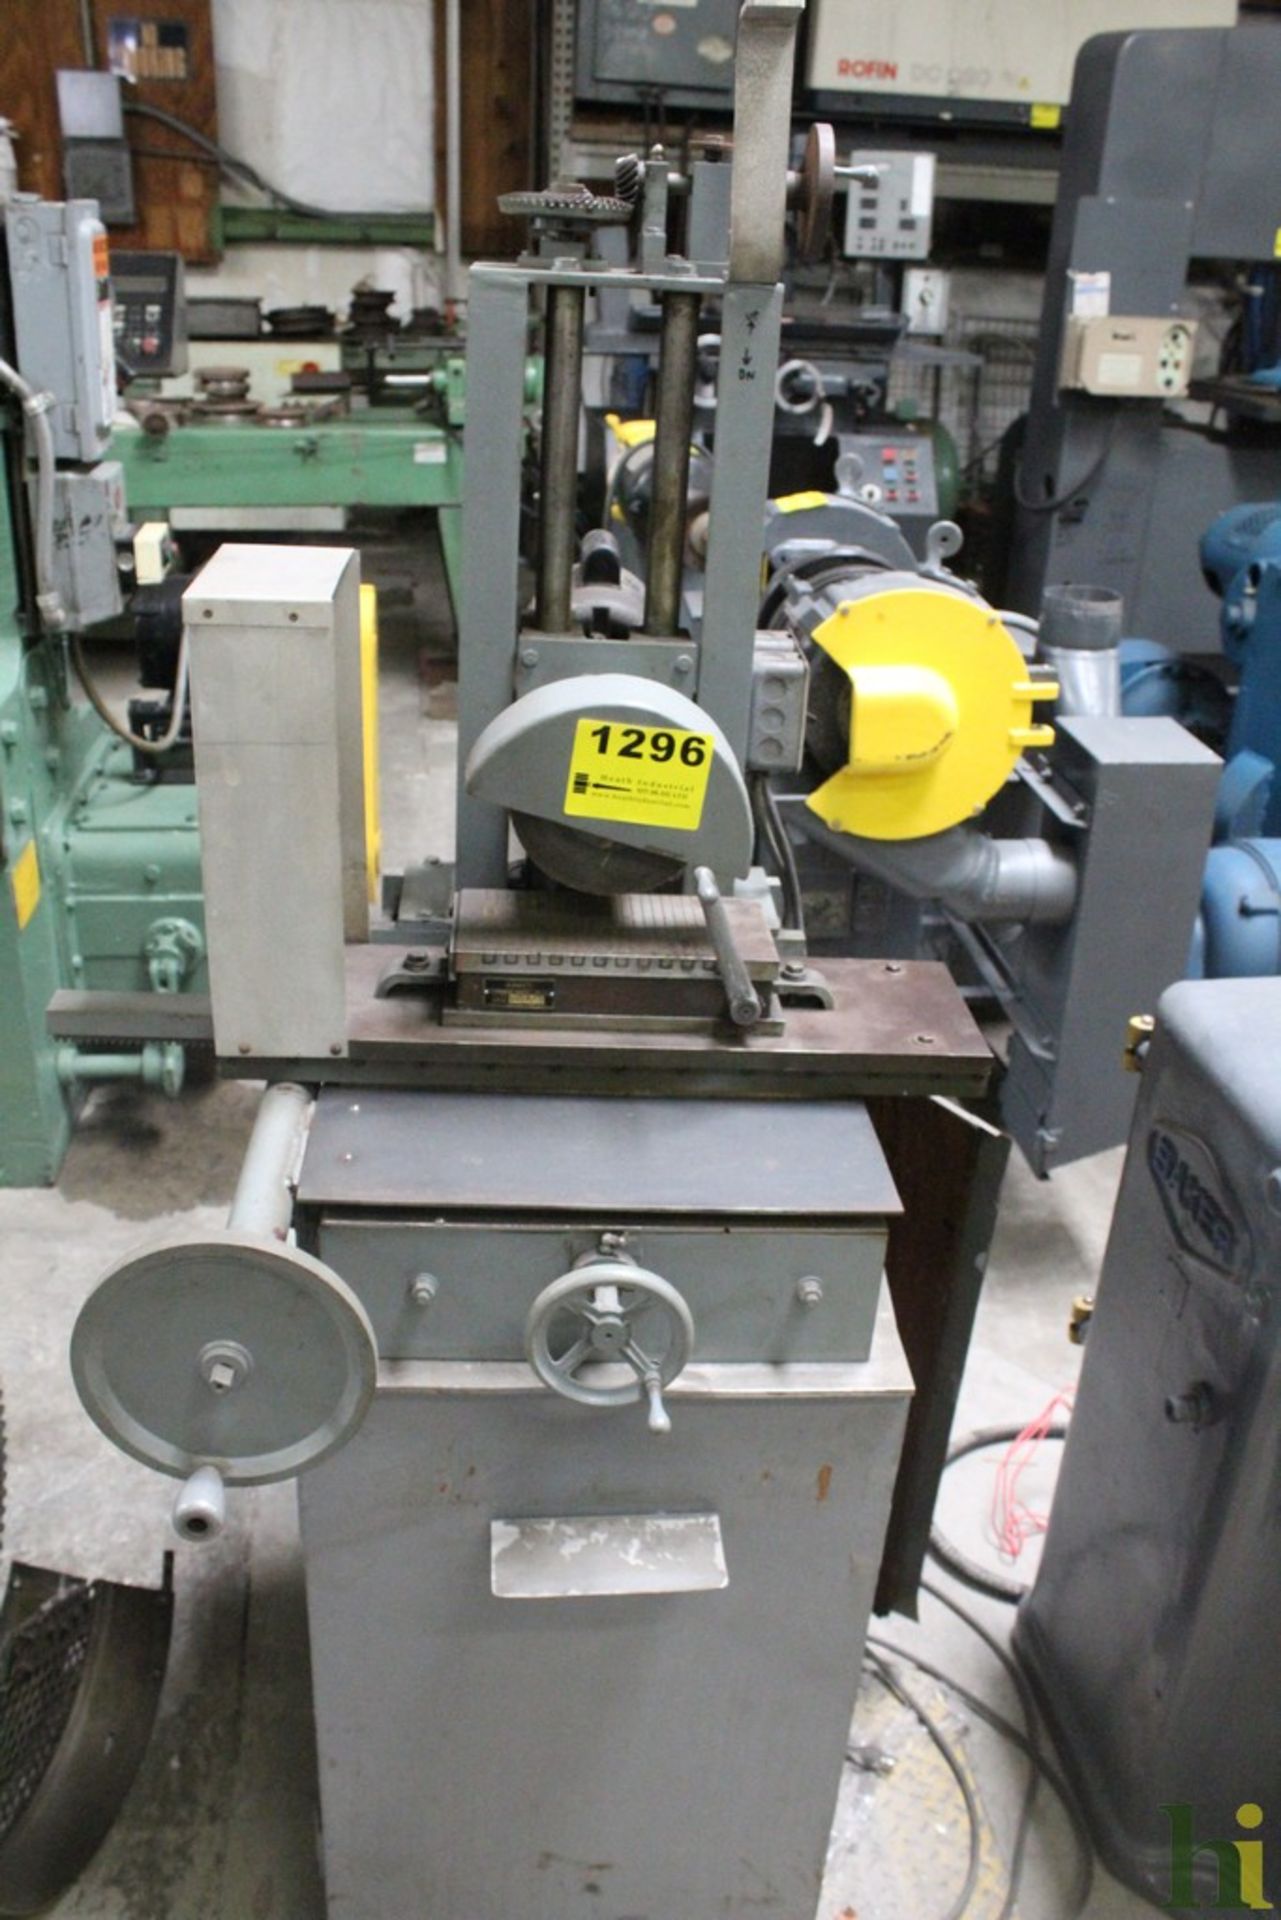 MANUAL SURFACE GRINDER WITH KANET MODEL KM-810 PERMANENT MAGNETIC CHUCK